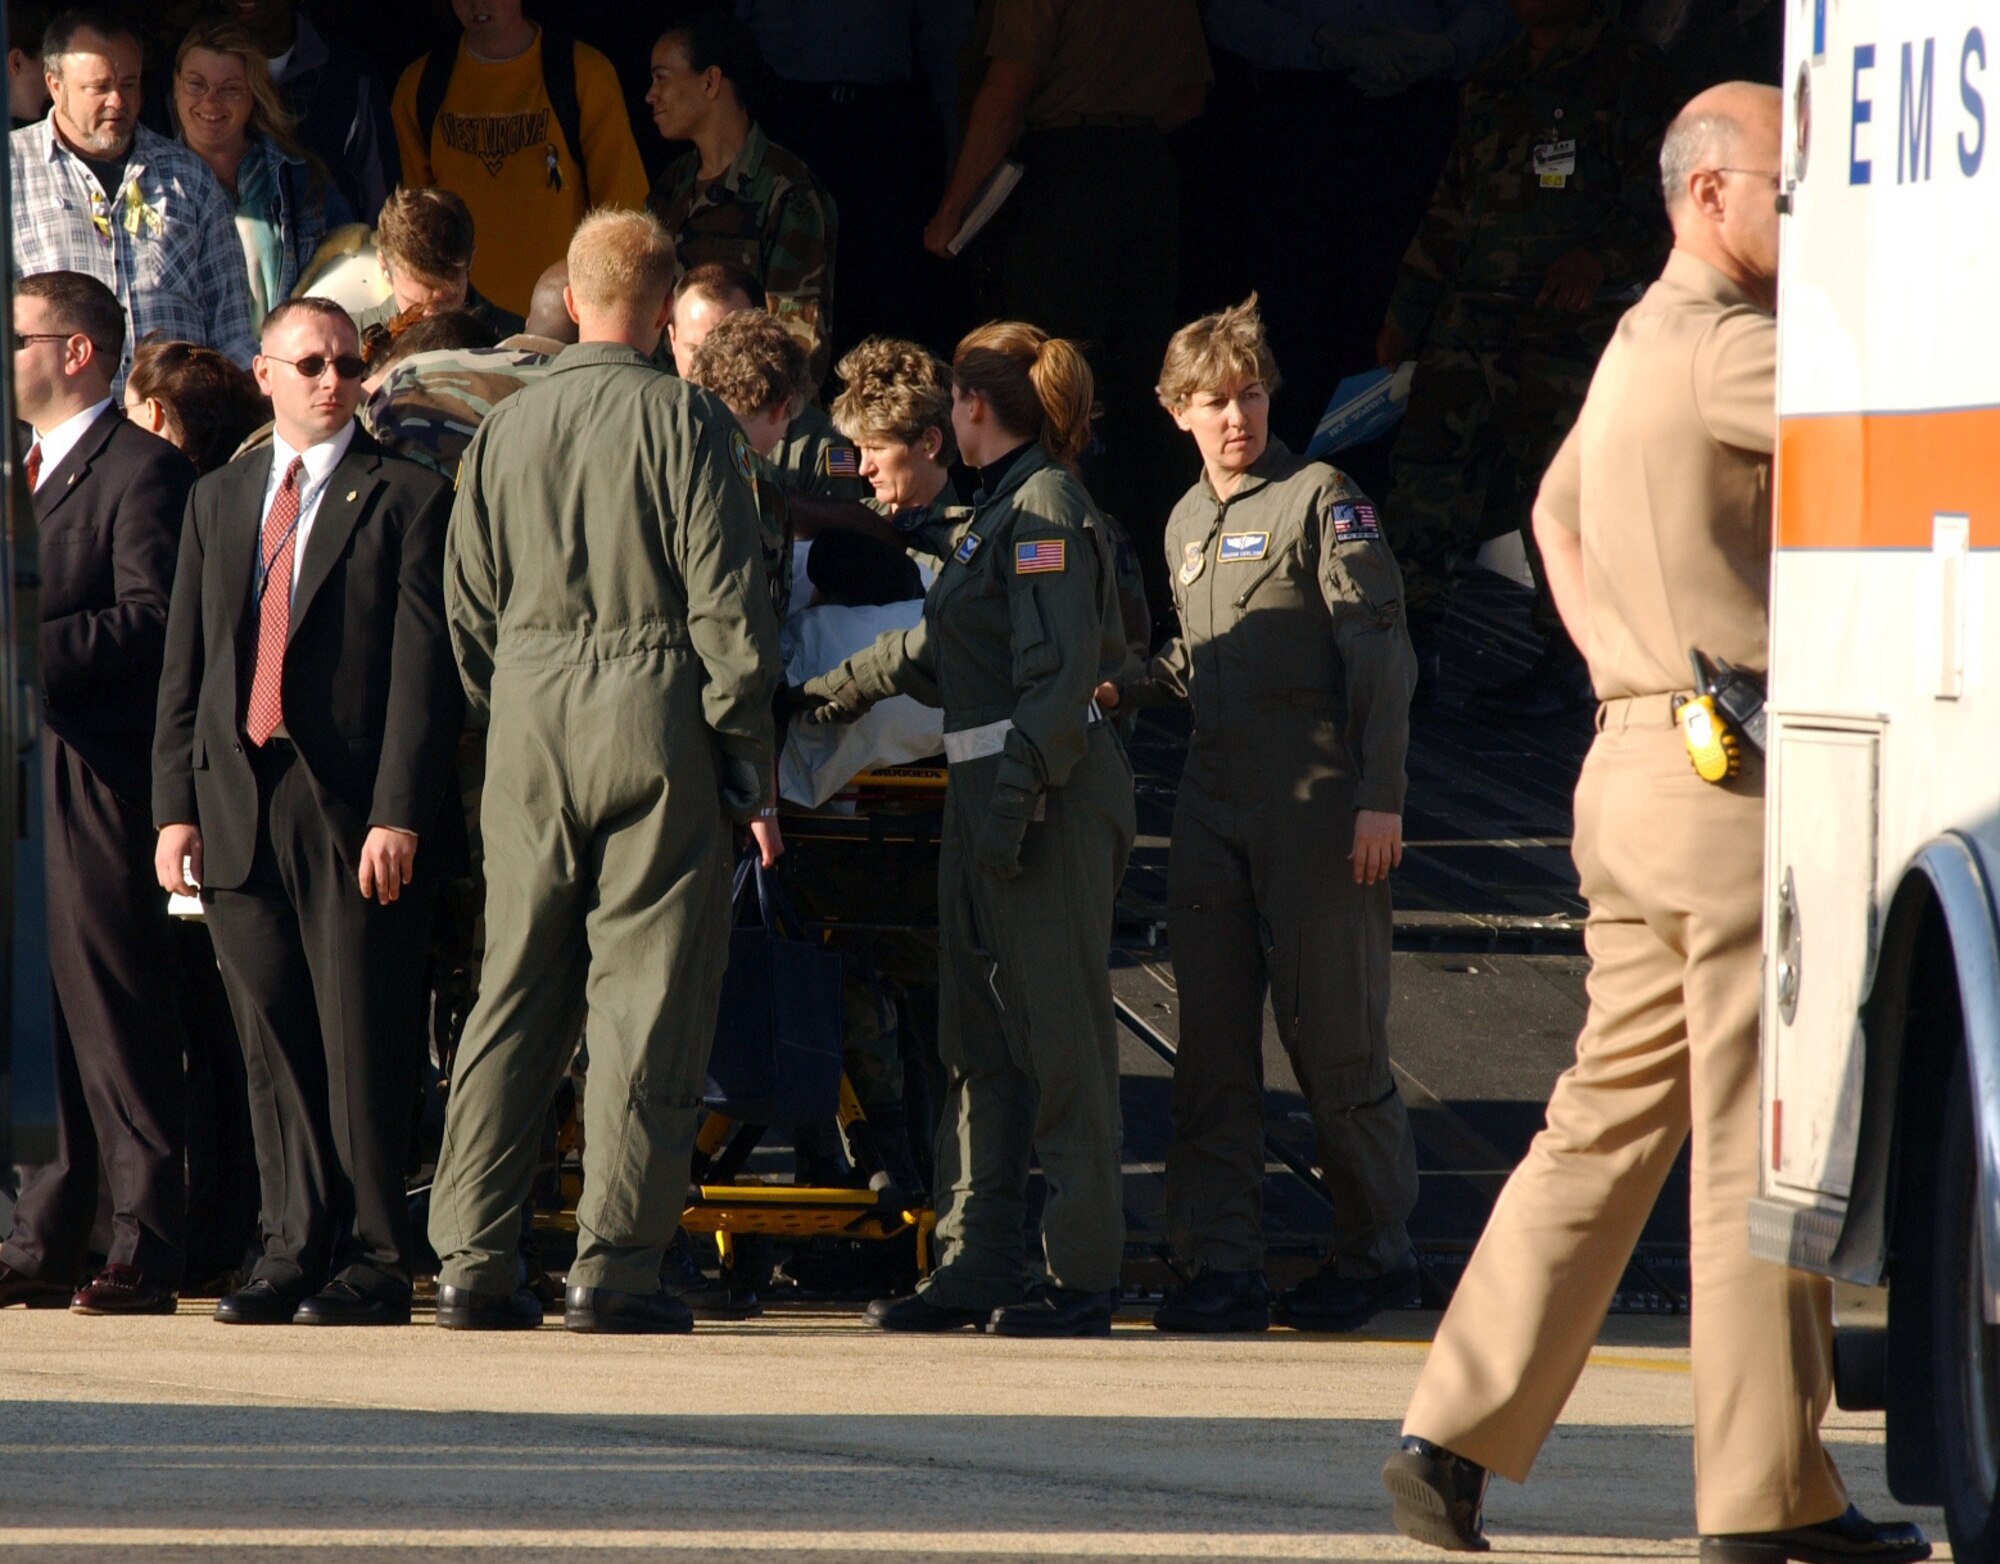 ANDREWS AIR FORCE BASE, Md. -- Army Pfc. Jessica Lynch, a prisoner of war rescued from Iraqi captivity, is carried from a C-17 Globemaster III into an awaiting ambulance here.  The ambulance brought her to nearby Walter Reed Medical Center for further treatment.  (U.S. Air Force Photo by Senior Airman Charity Barrett)